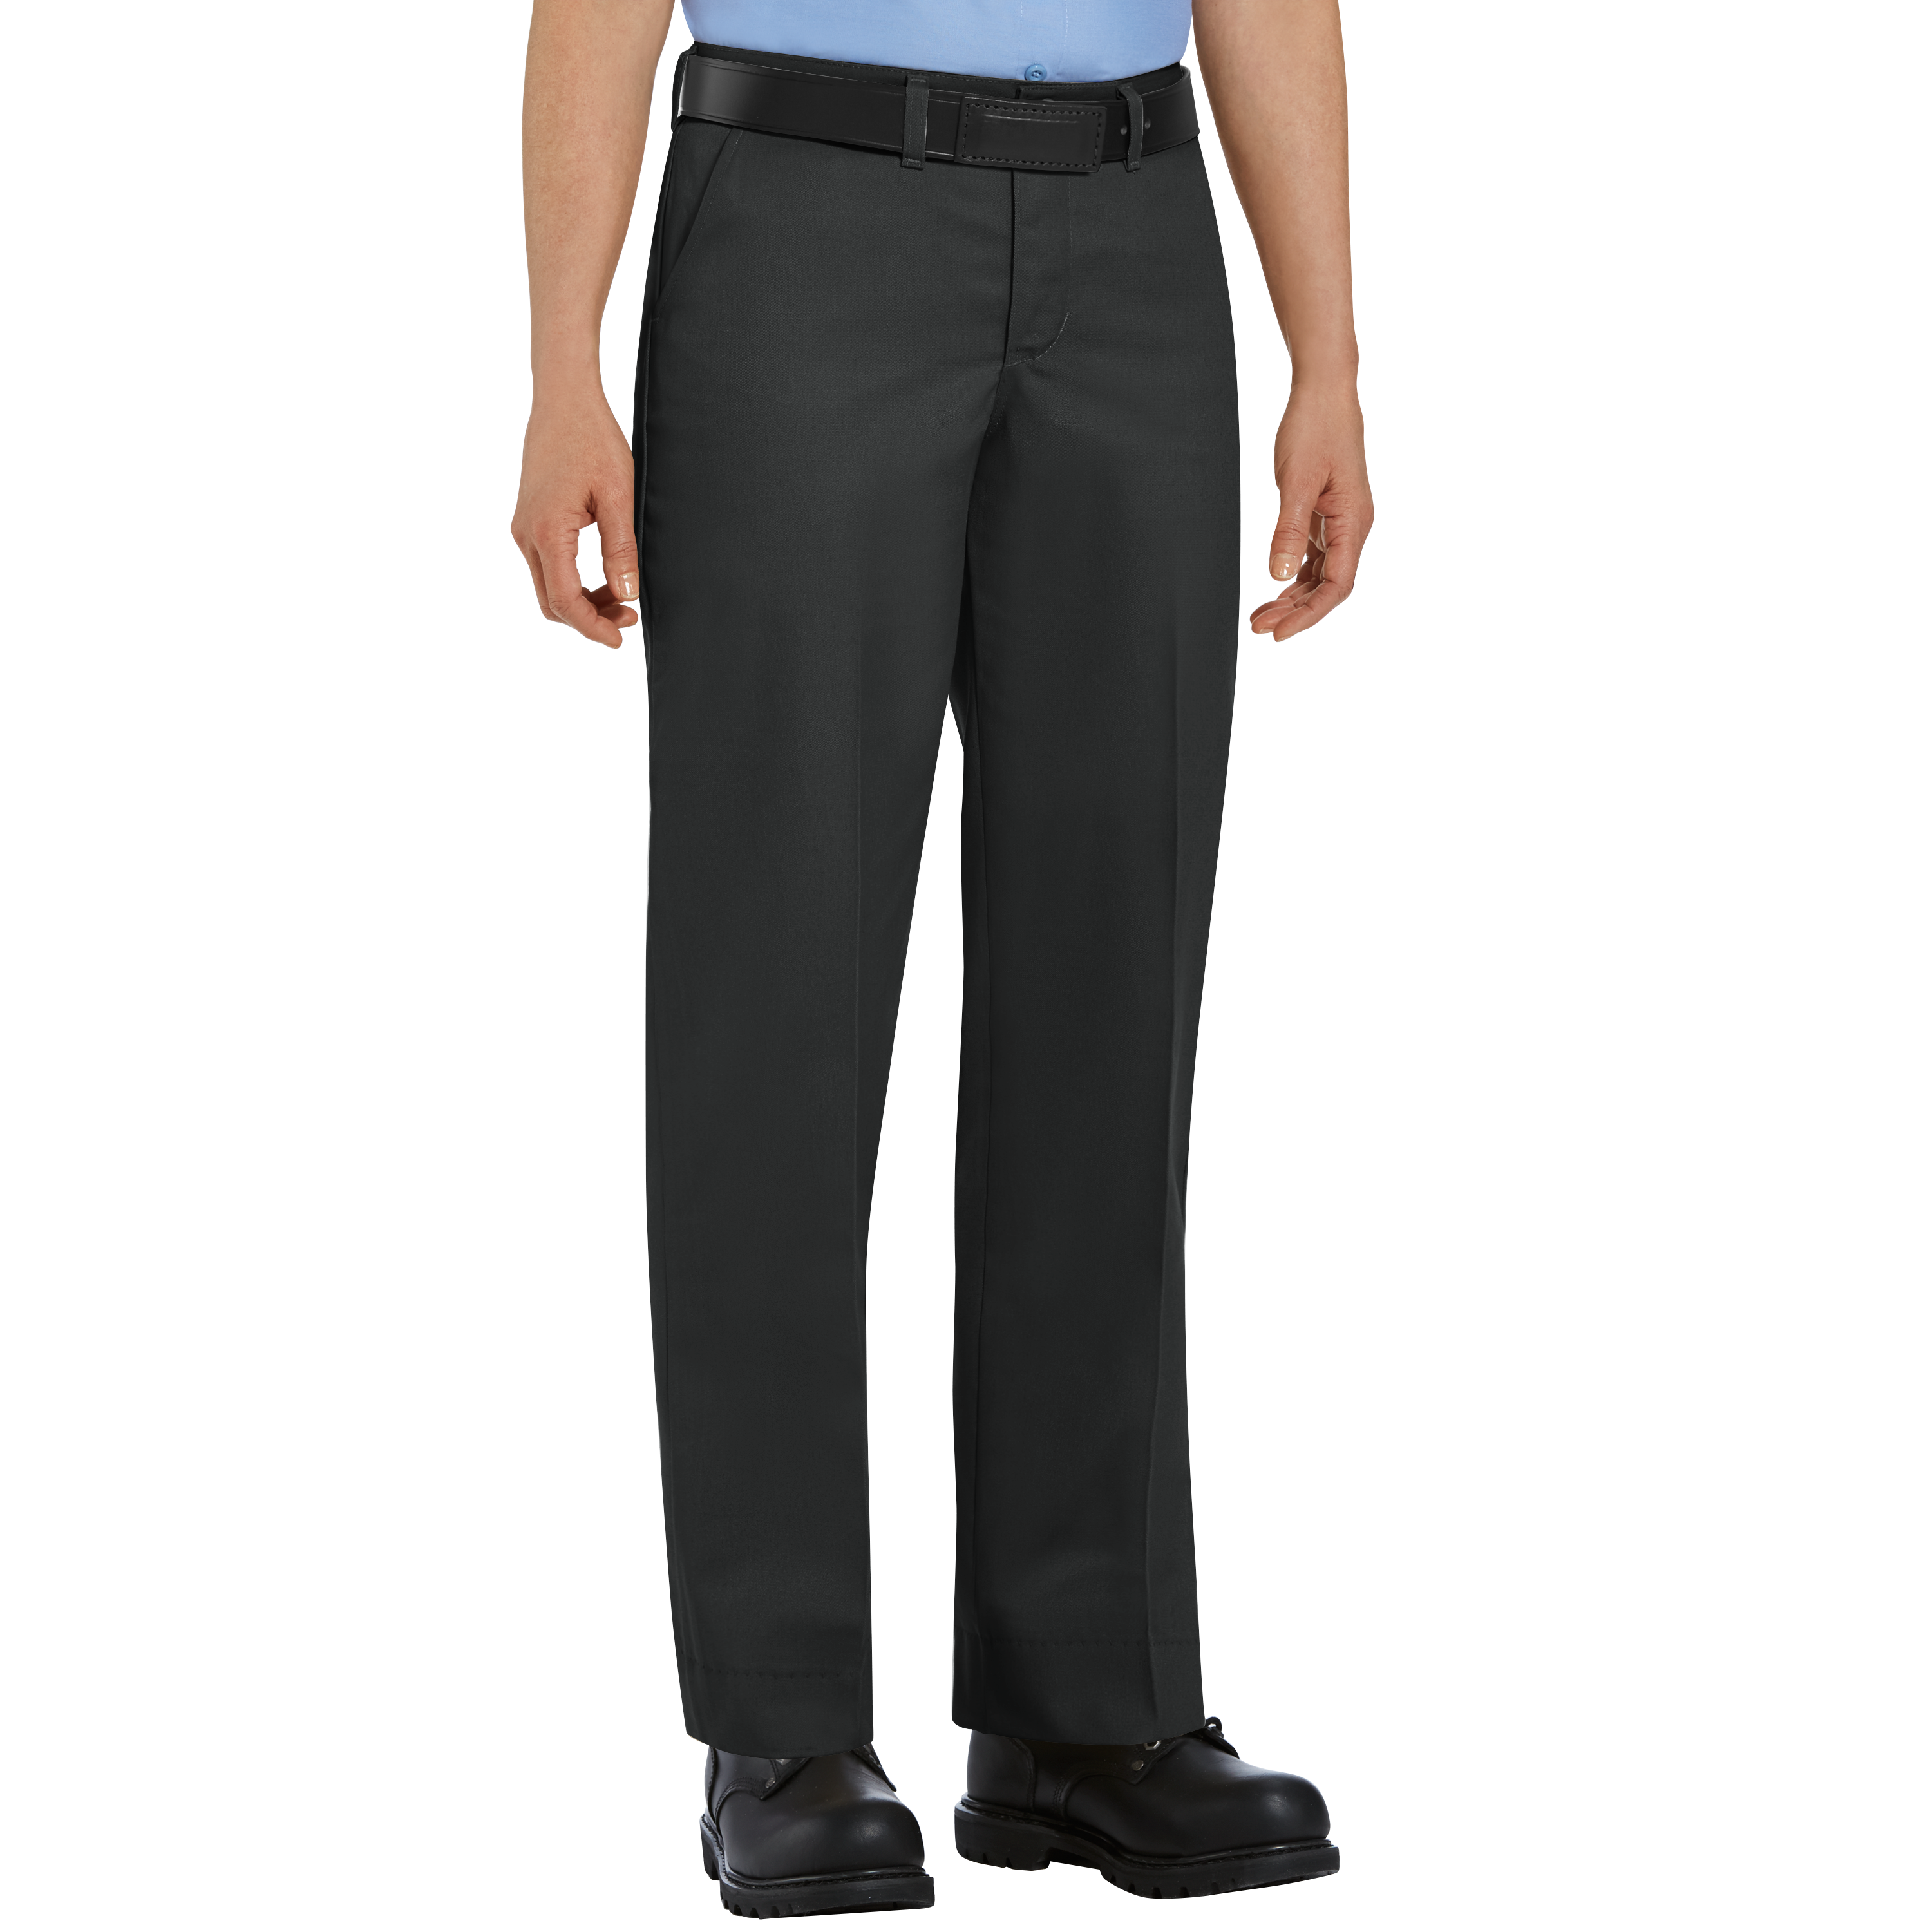 Professional Industrial Wears | Coveralls, Overalls, Industrial Shirts,  Pants, Formal Wear Shirts, Formal Wear Pants, Lab Coats